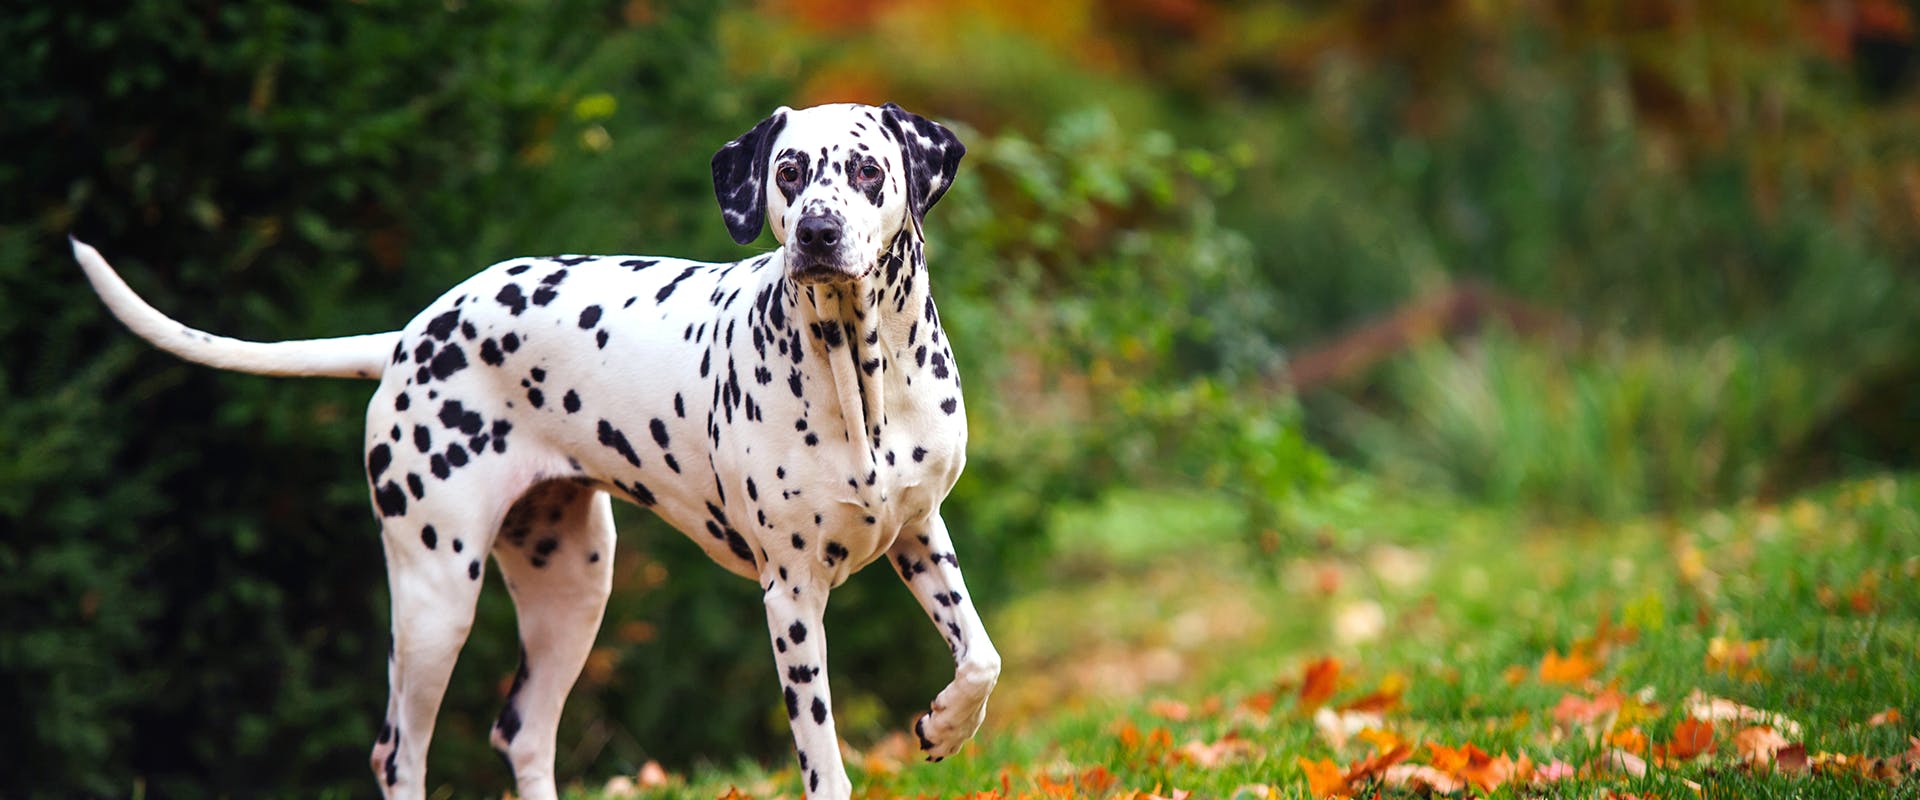 The History of Dalmatian Fire Dogs | TrustedHousesitters.com